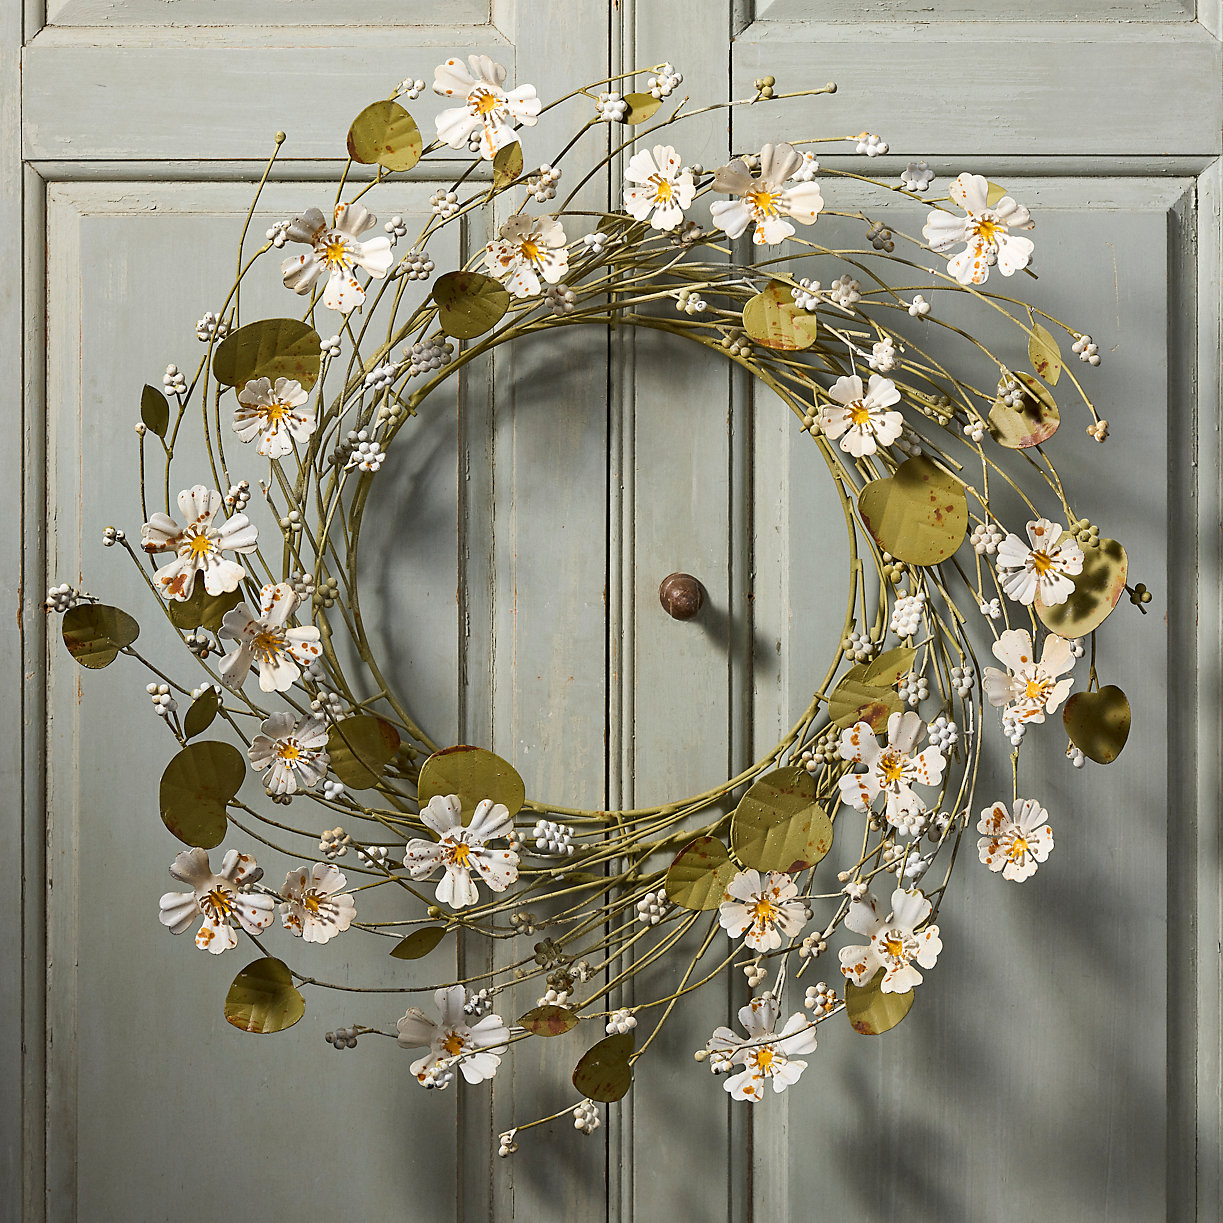 Wreath Making Supplies Easter Wreath Spring Wreath for Front Door Wreath  Base Frame Wreaths for Doors